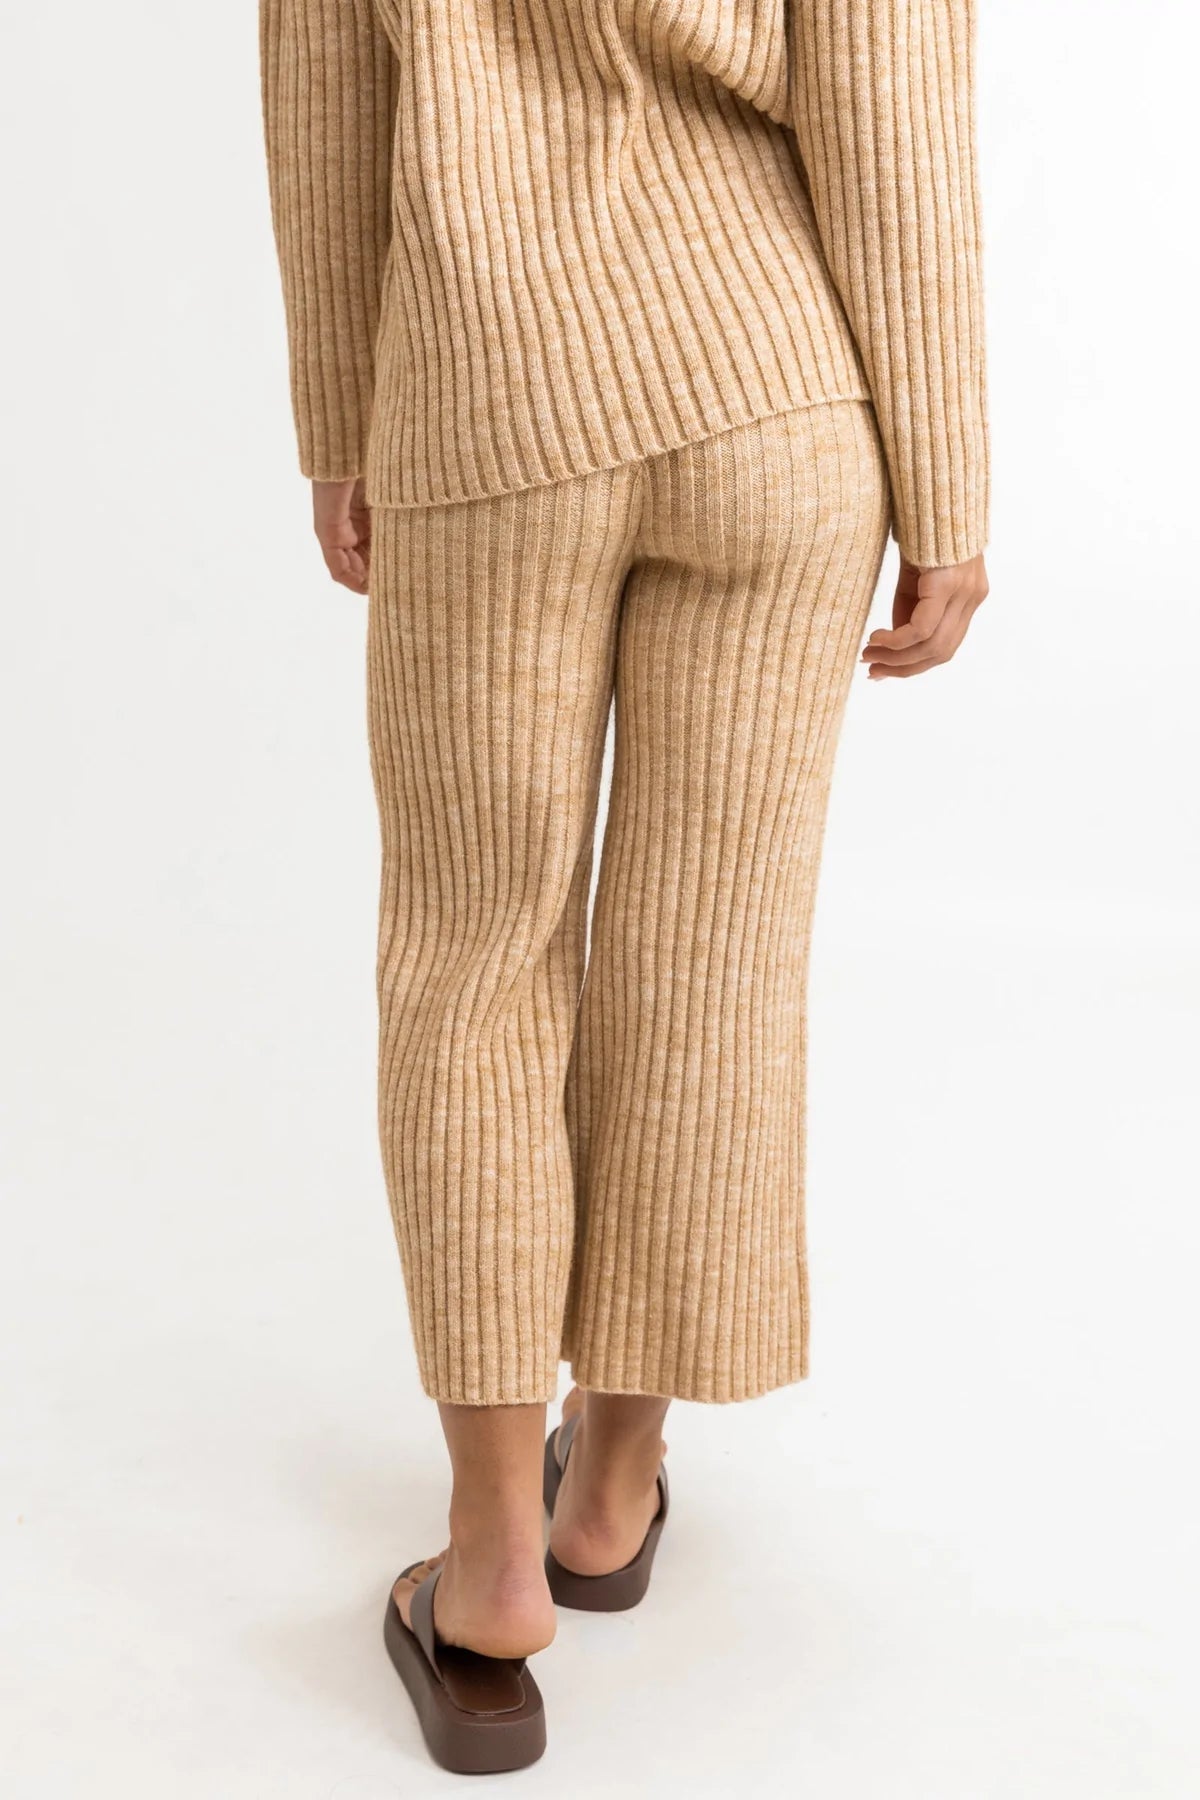 Olo Cozy Pants Sewing Pattern